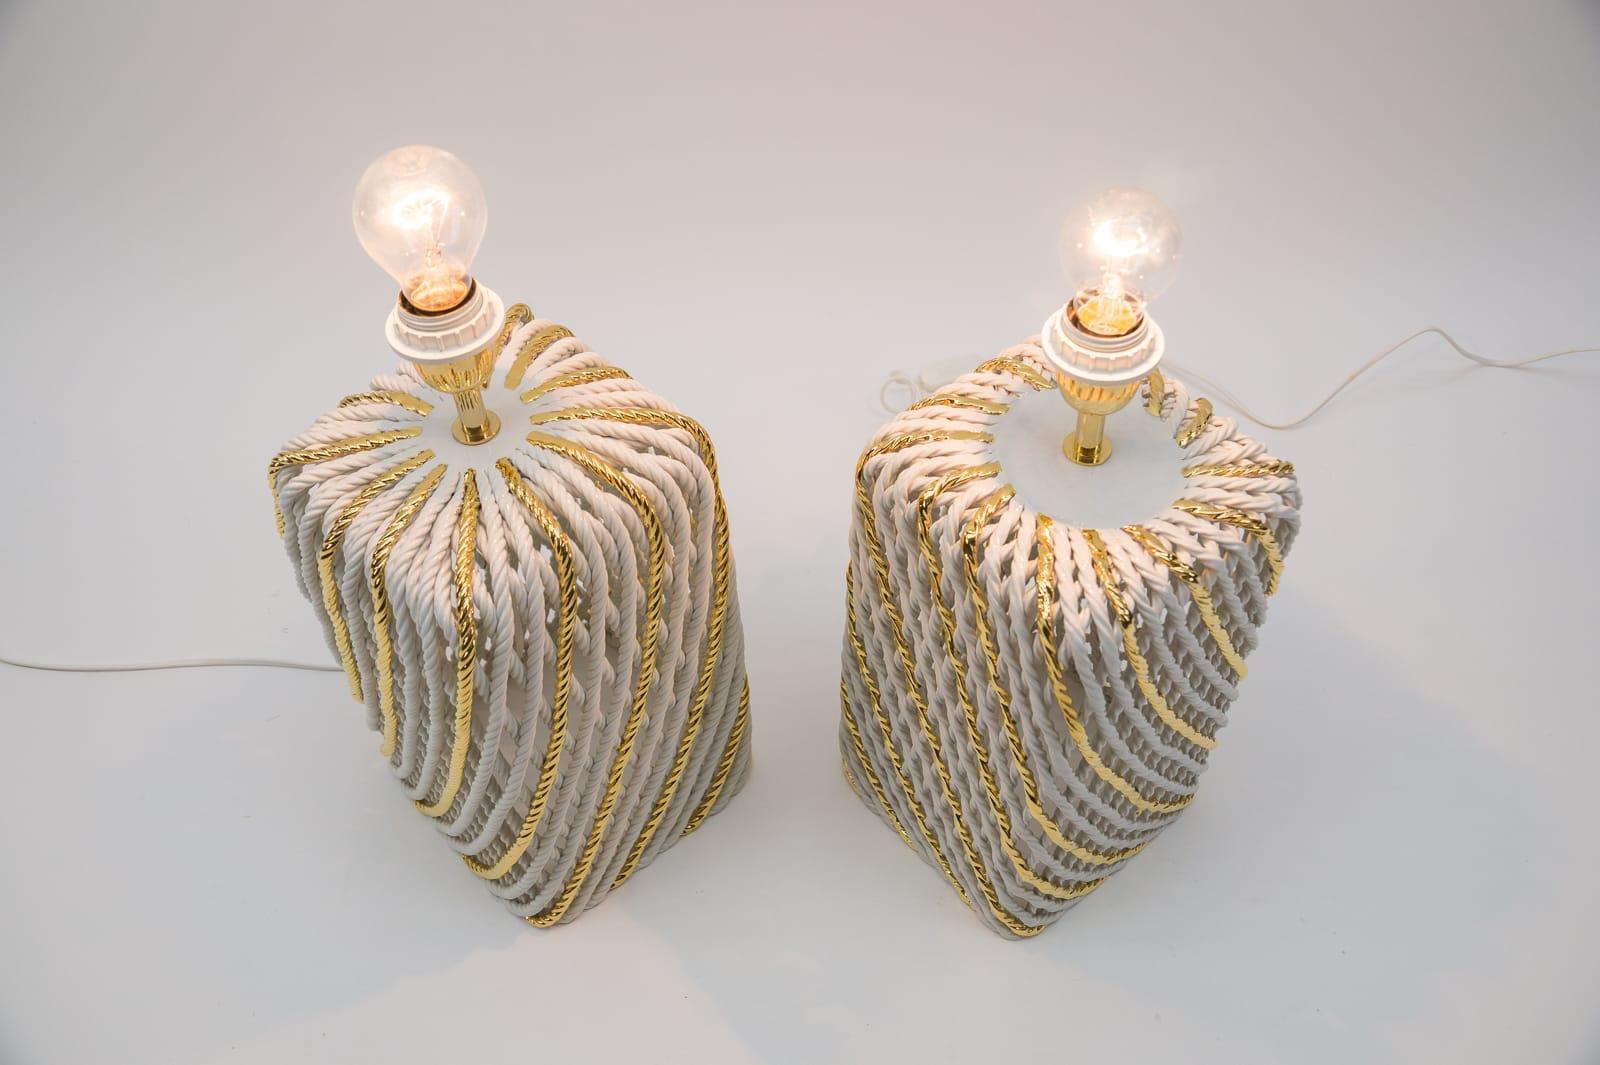 Pair of Extravagant Ceramic Braid Table Lamps, 1980s Italy For Sale 4